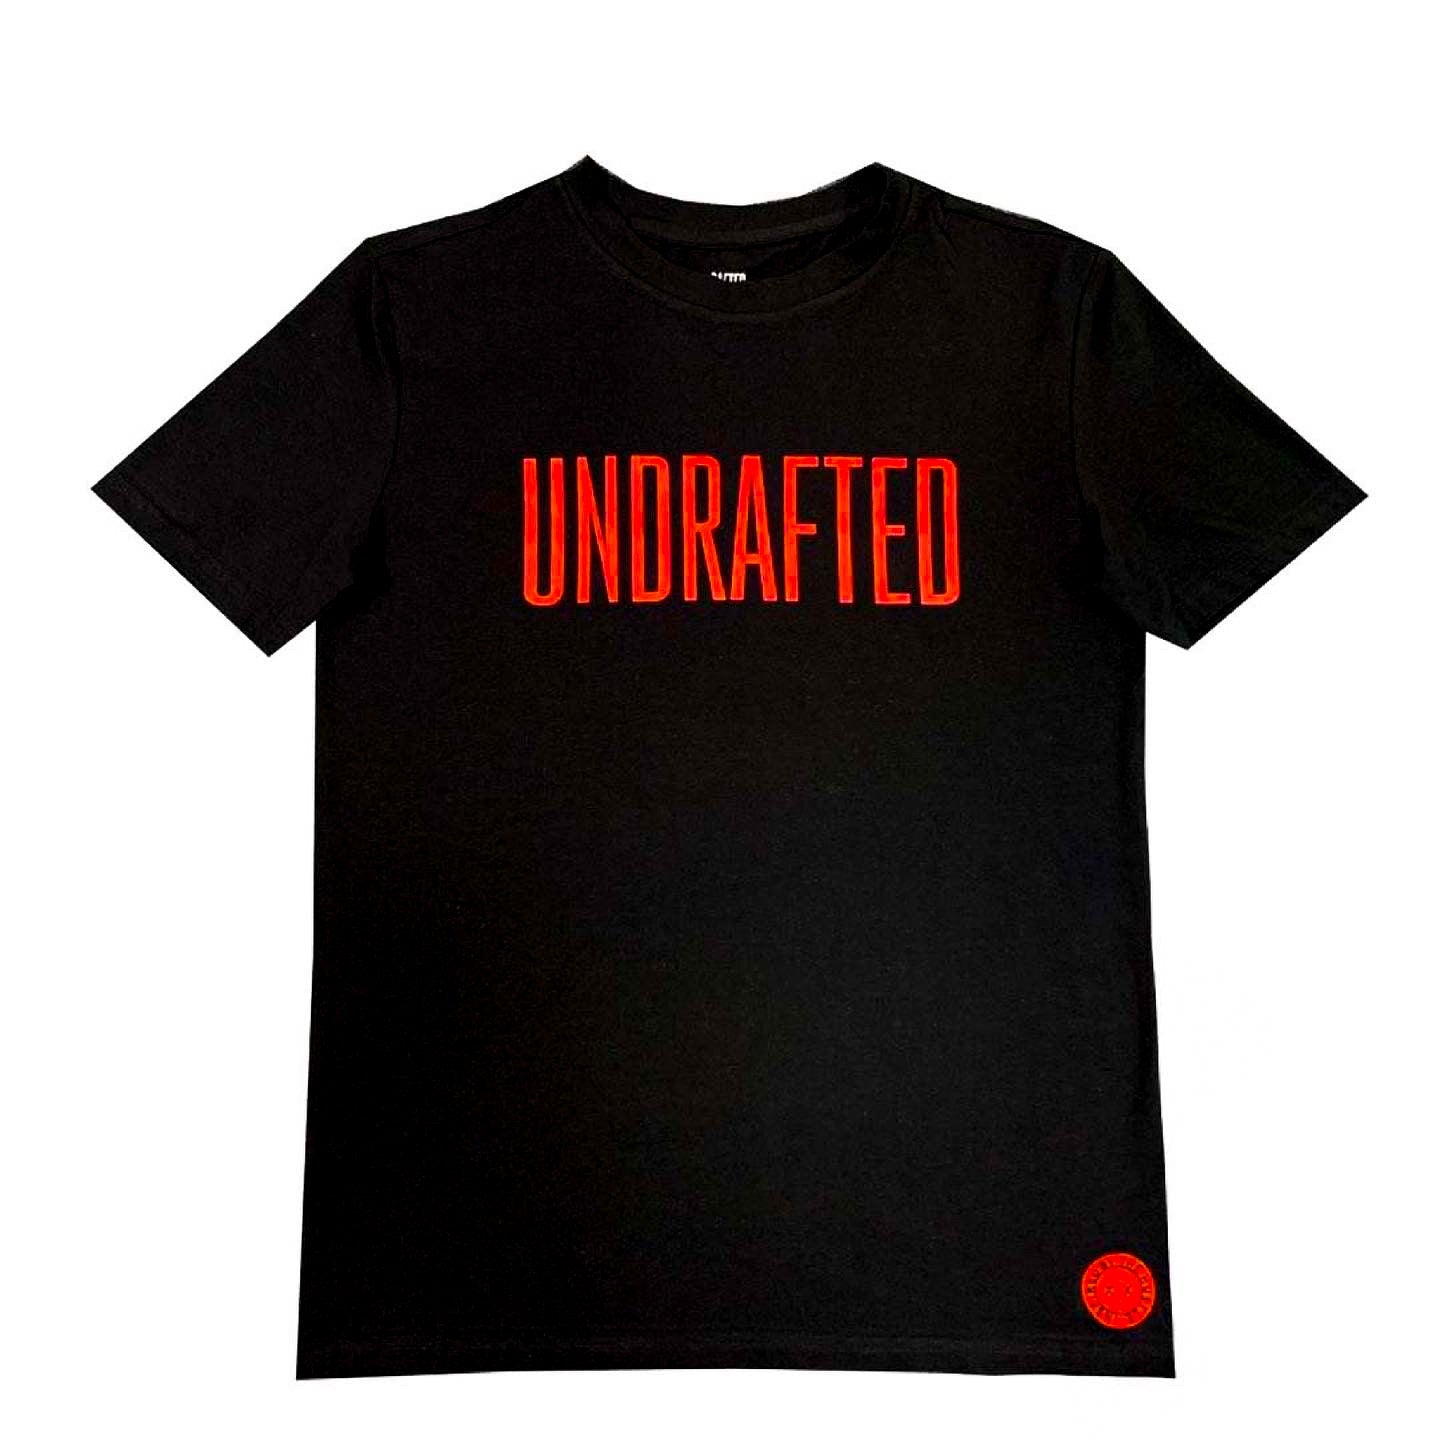 Undrafted T-Shirt Black/Red*